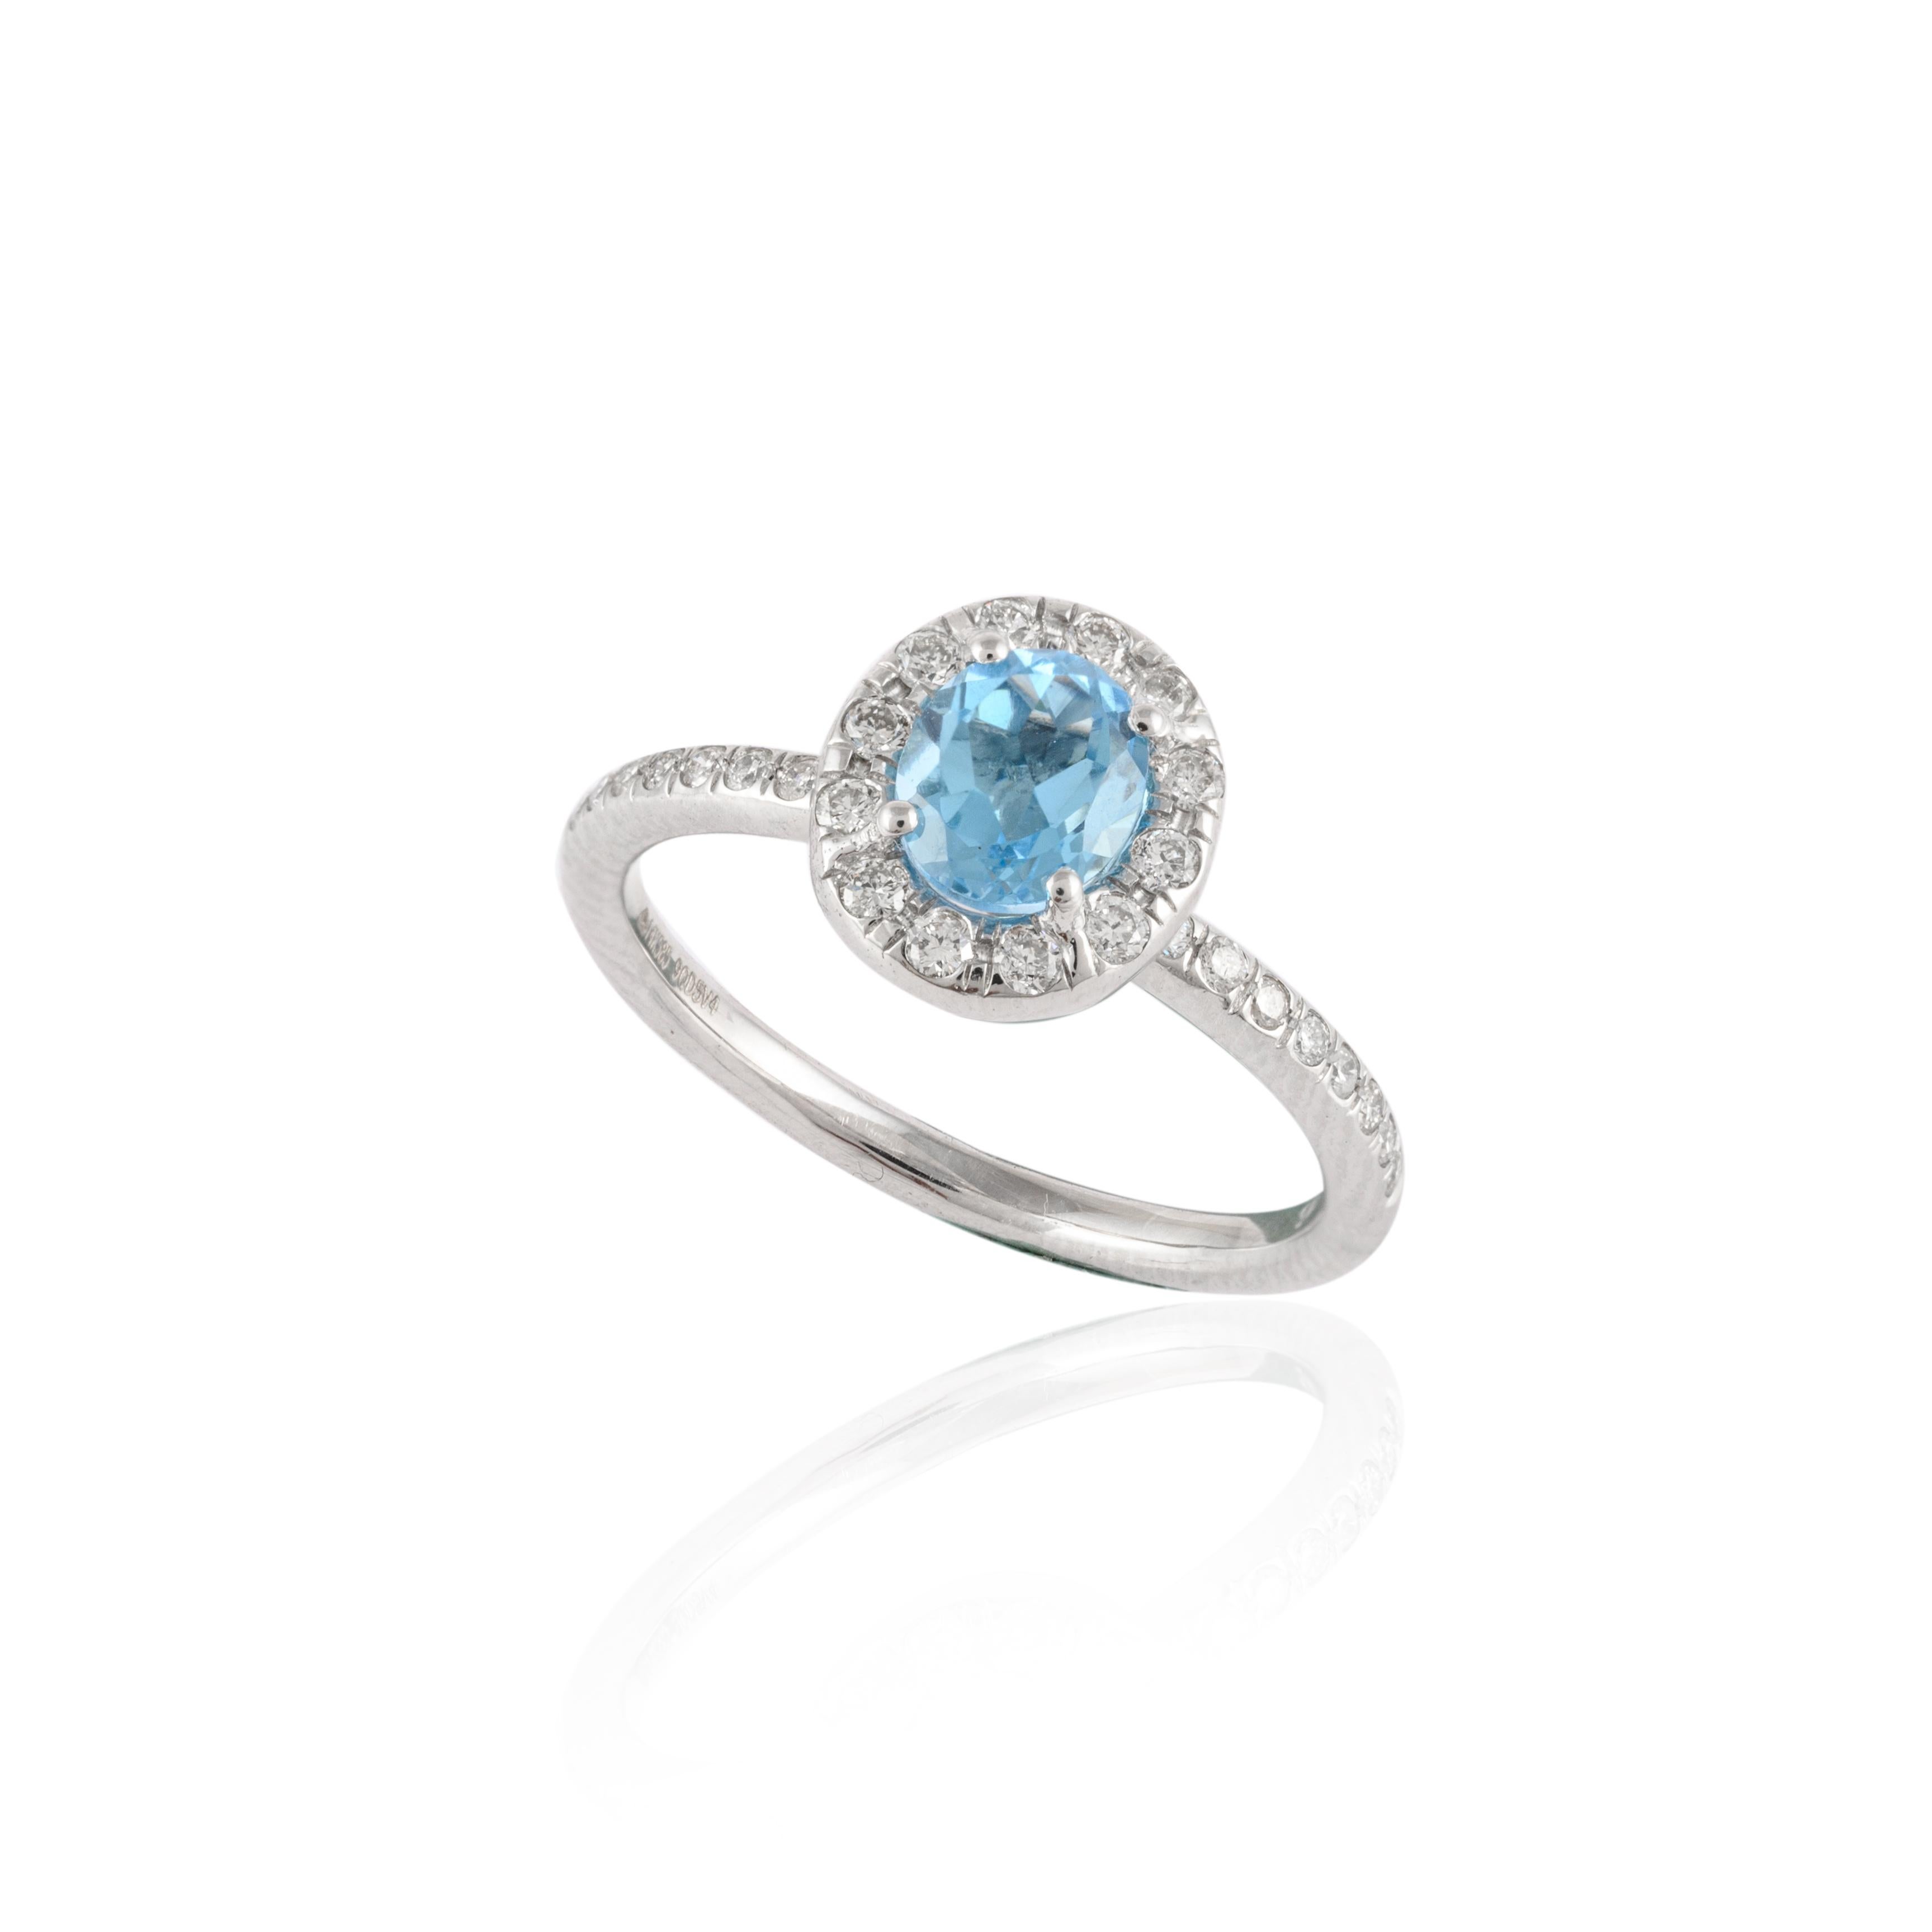 For Sale:  Real 14kt Solid White Gold Halo Diamond And Oval Cut Blue Topaz Ring For Her 4